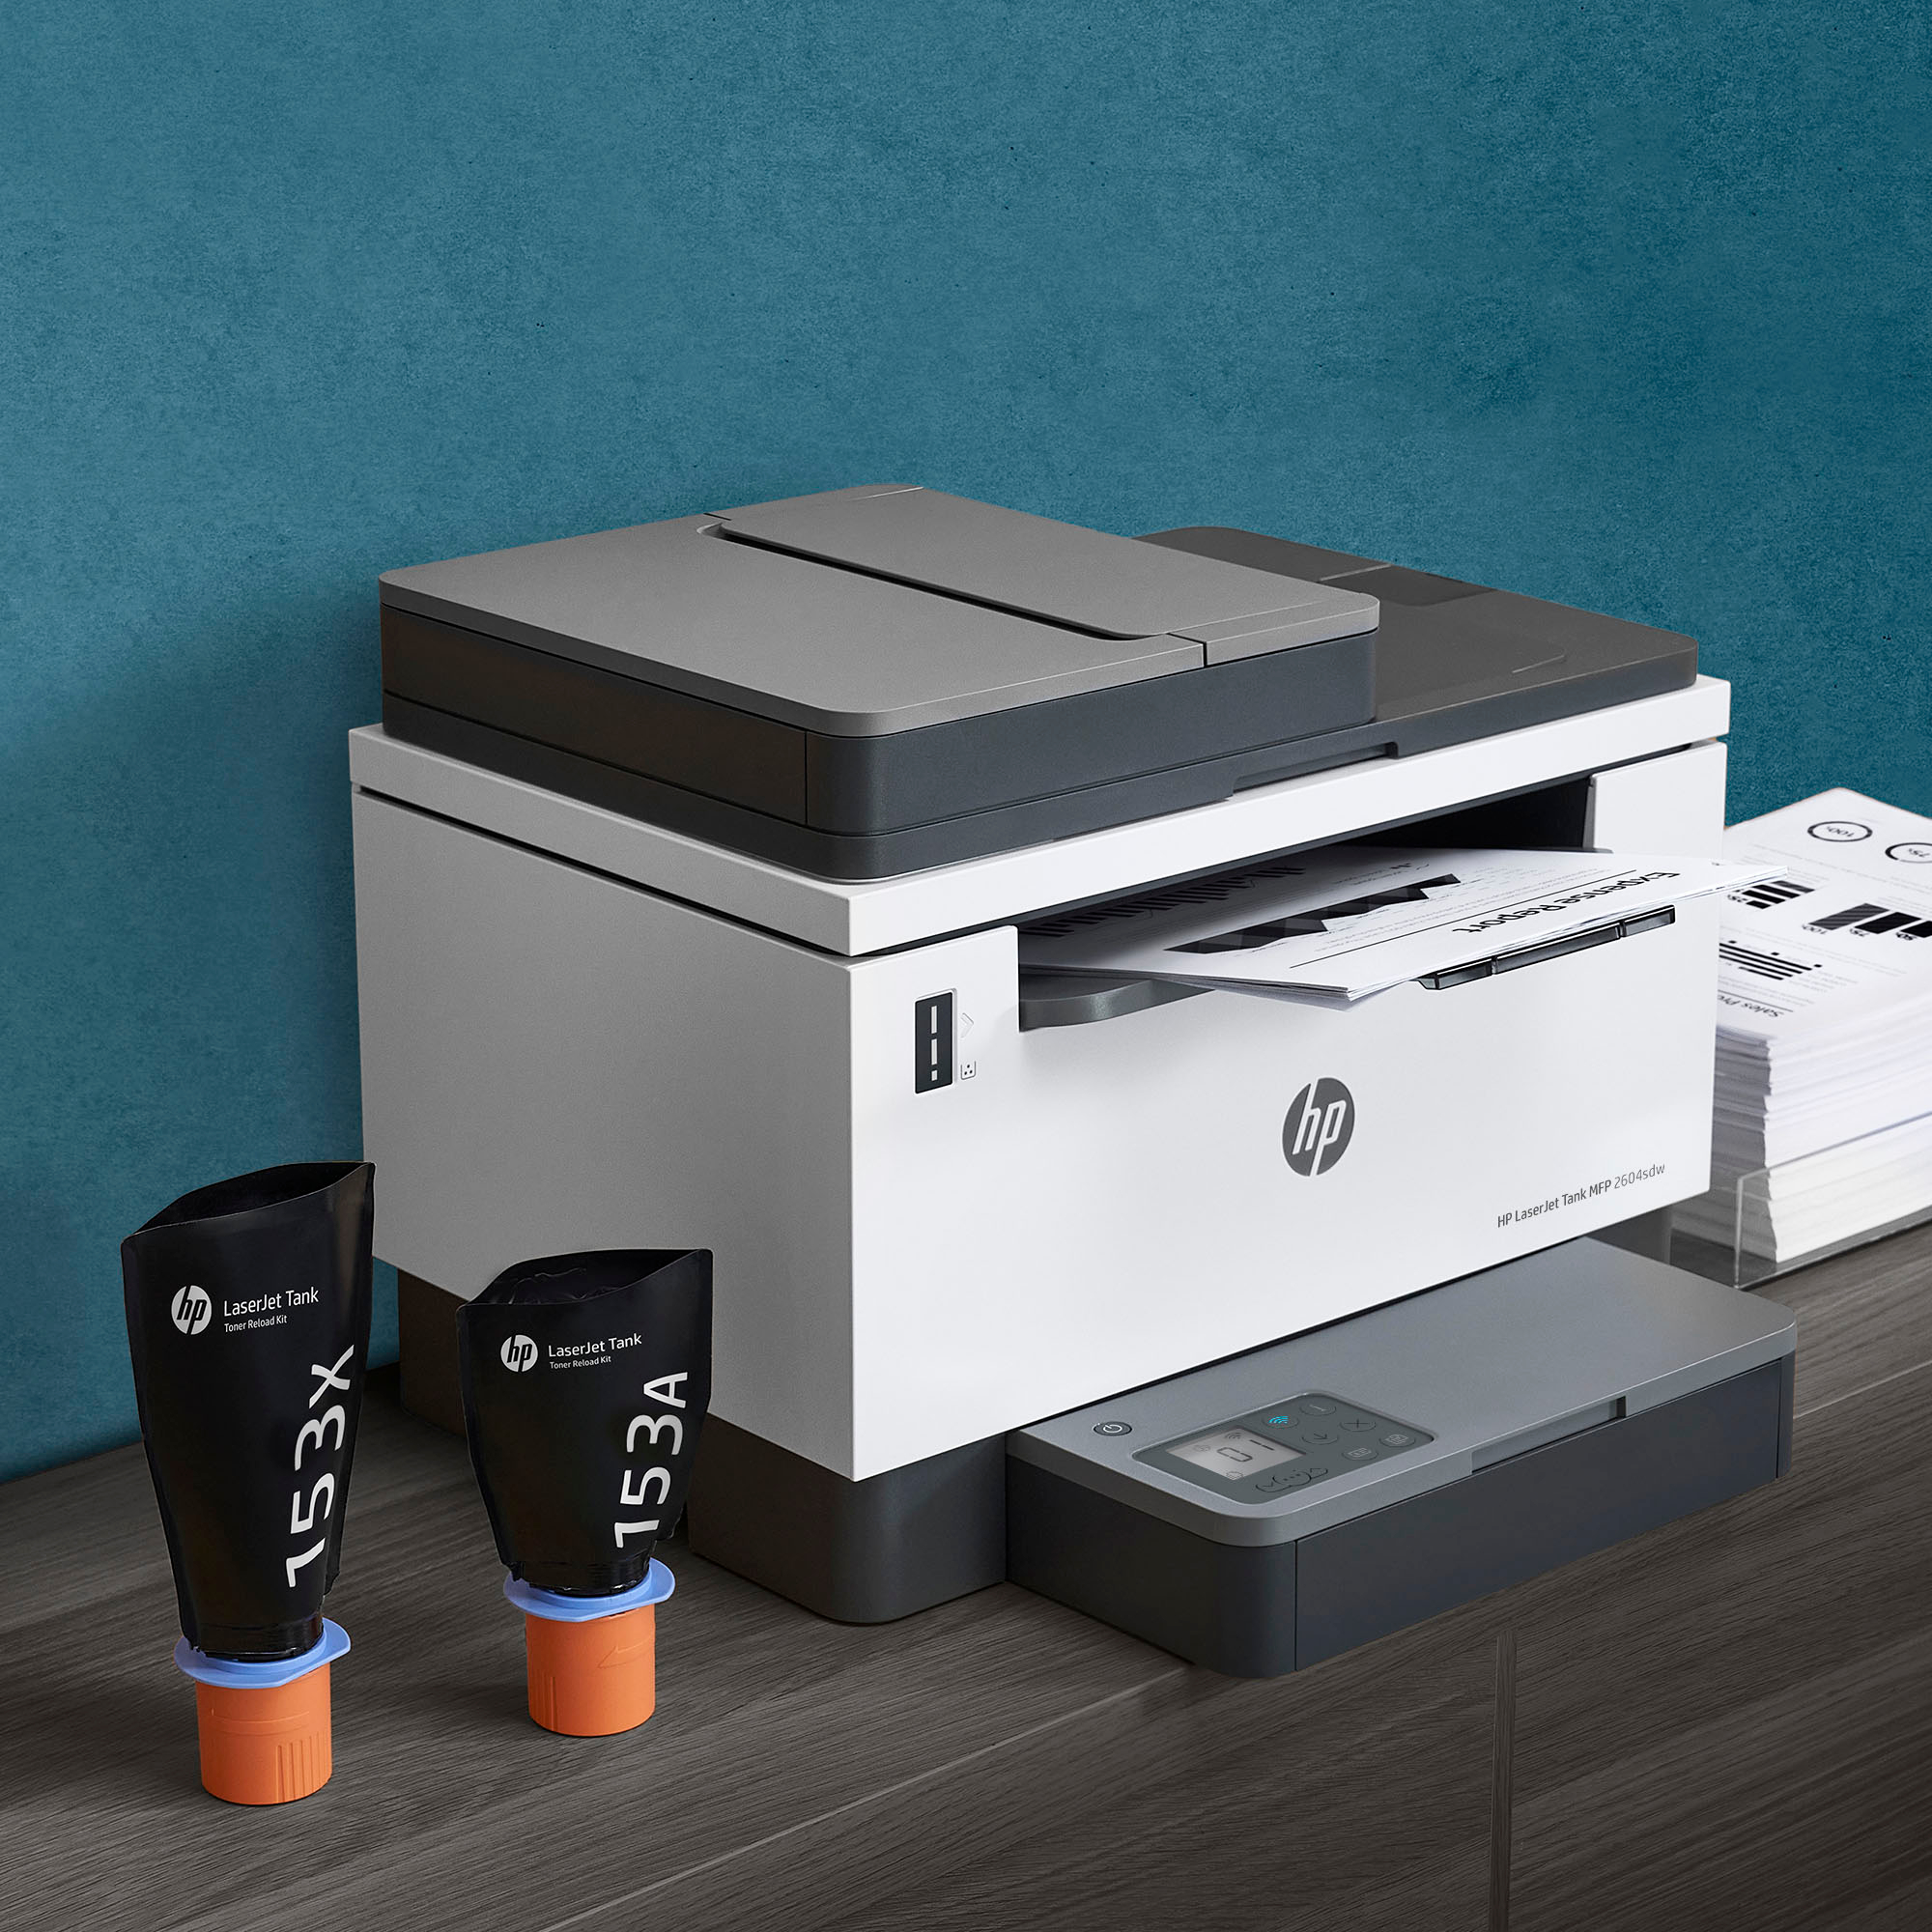 Office Outlet - The HP OfficeJet 6950 Printer delivers affordable,  professional quality documents that help you stand out. Only £74.99!